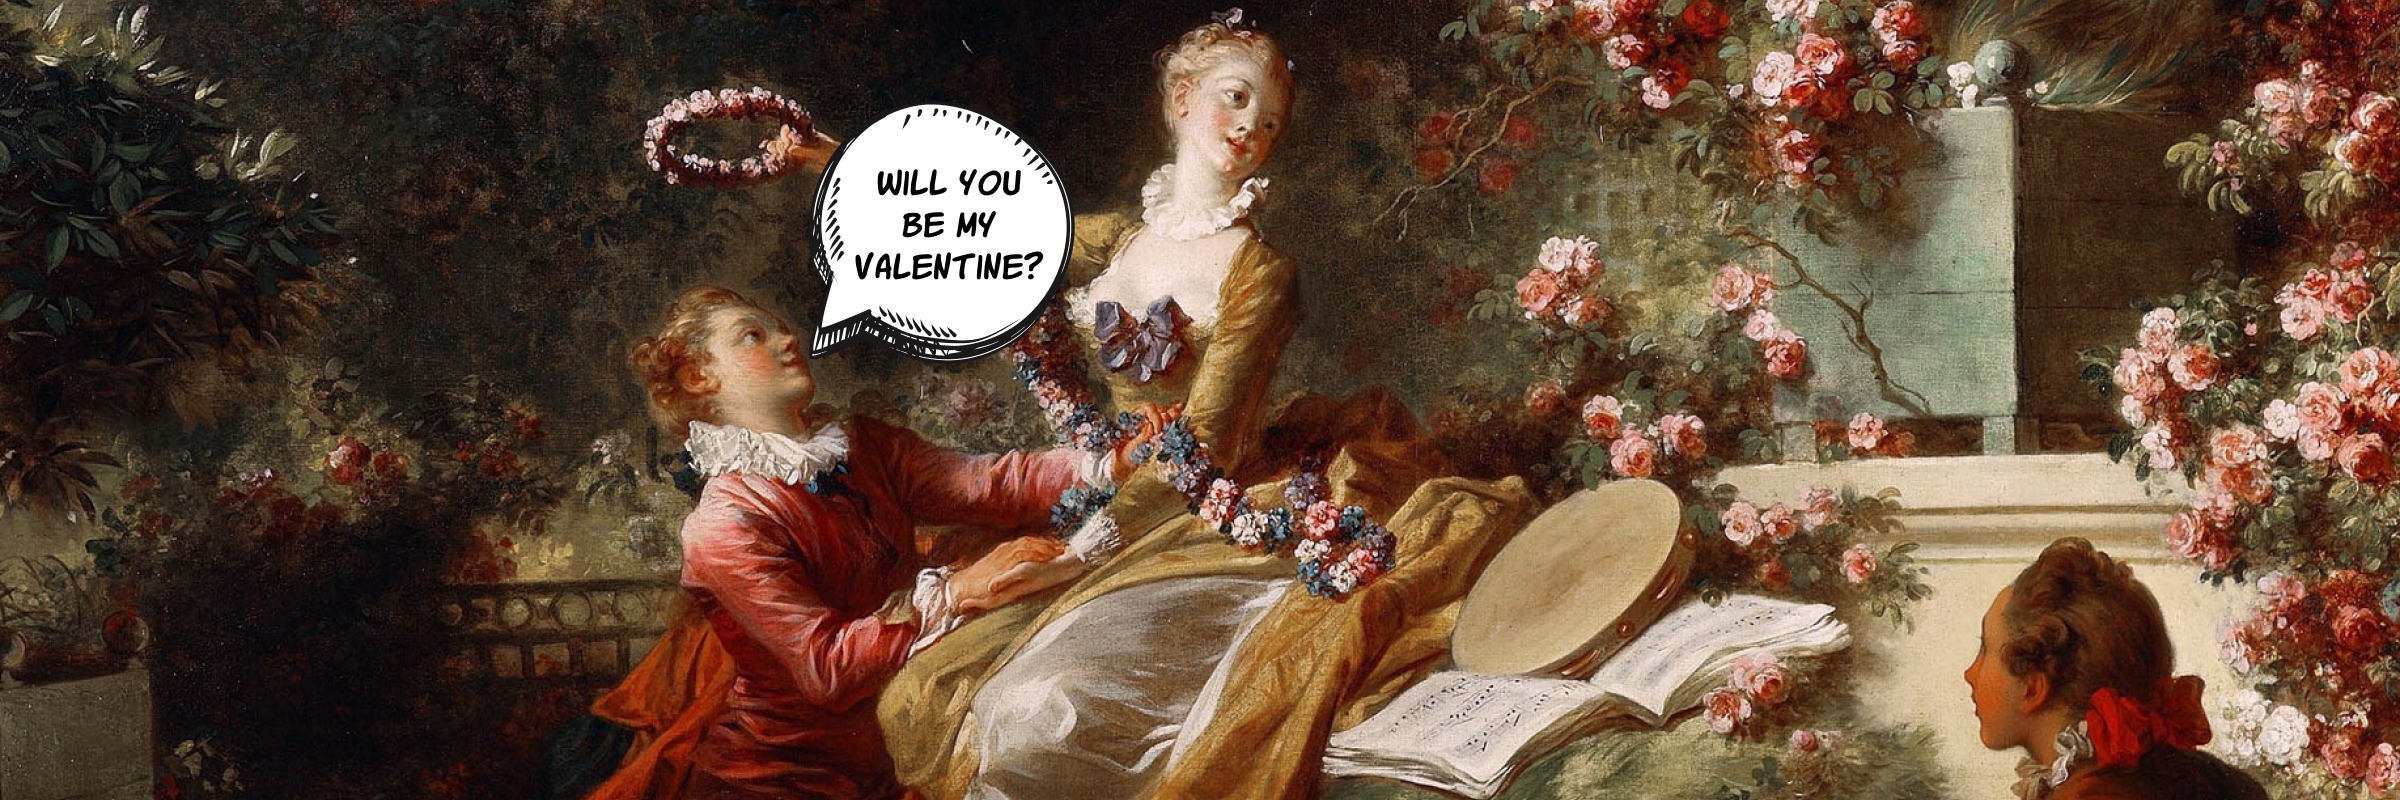 77 Catchy Valentine’s Day Slogans and Phrases for Marketing in 2023